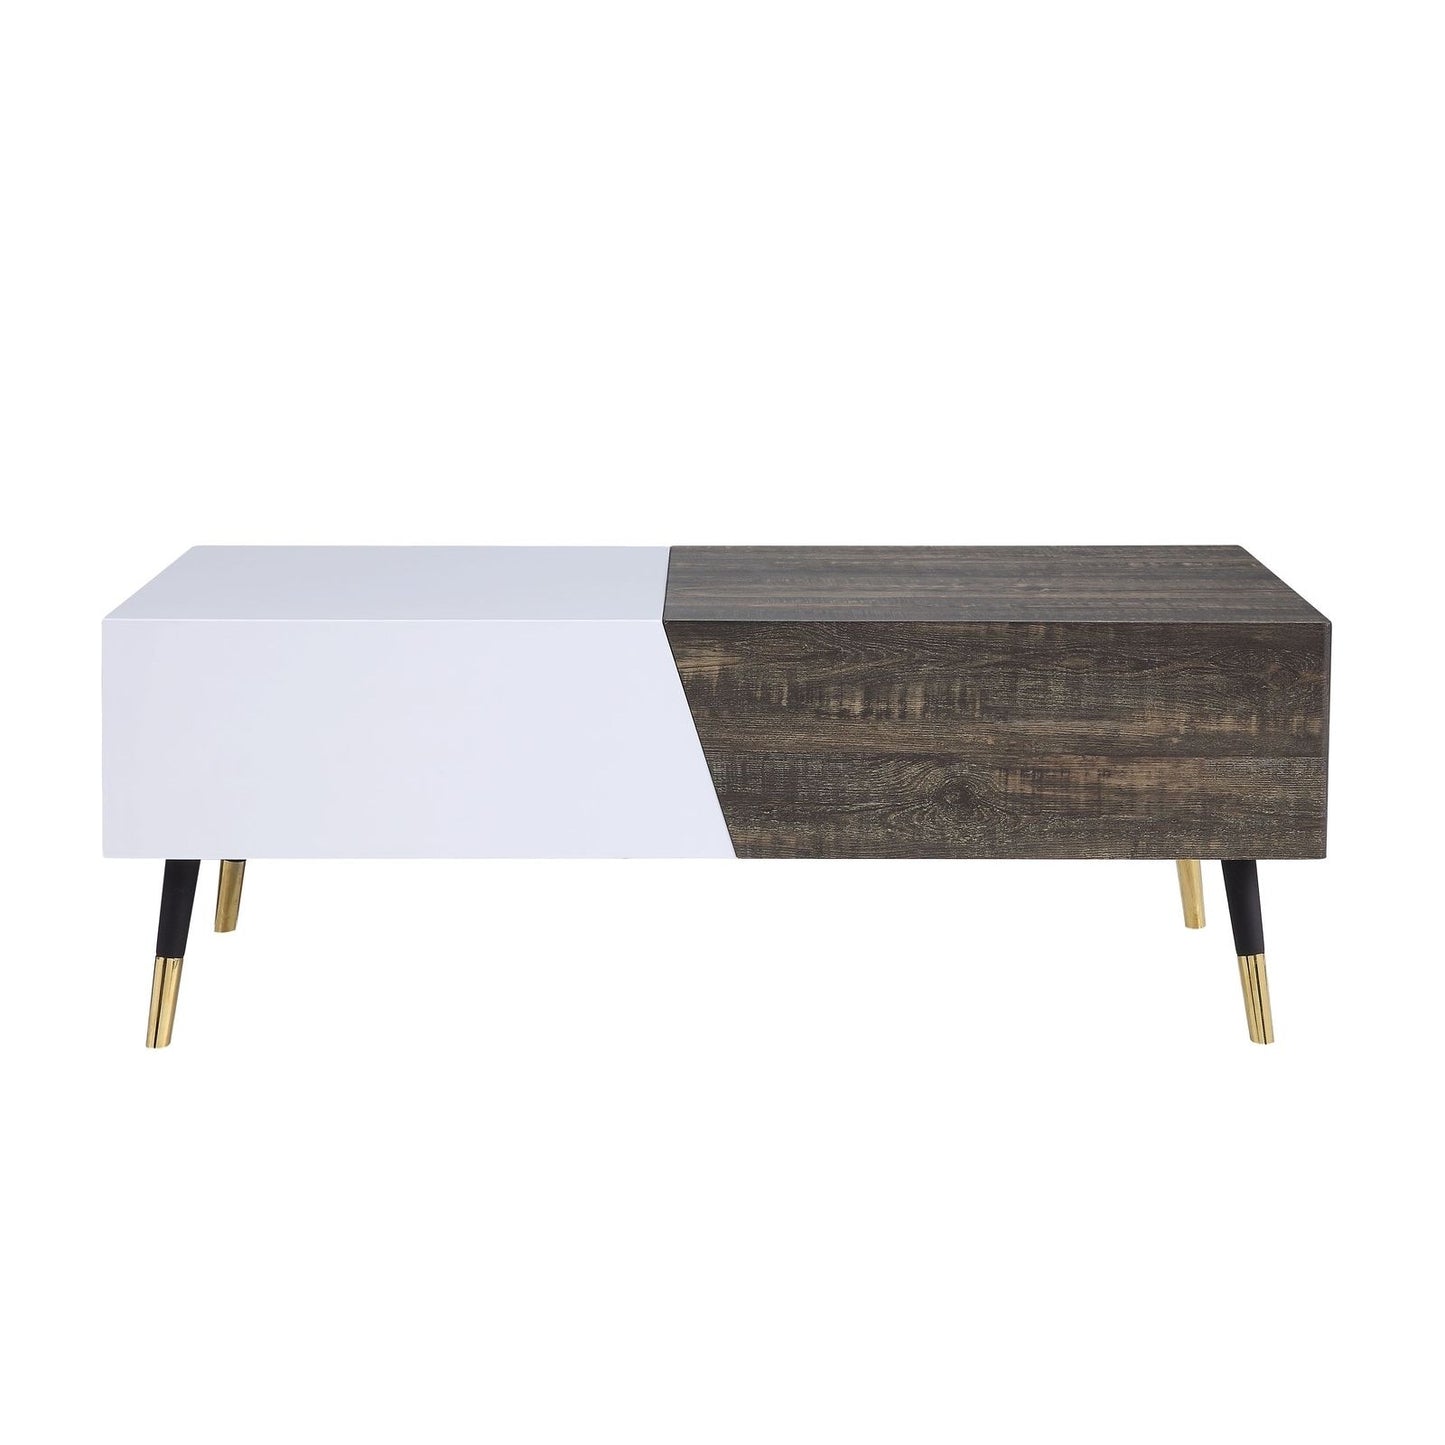 Mid-Century Orion Coffee Table White High Gloss & Rustic Oak Retractable Center Table